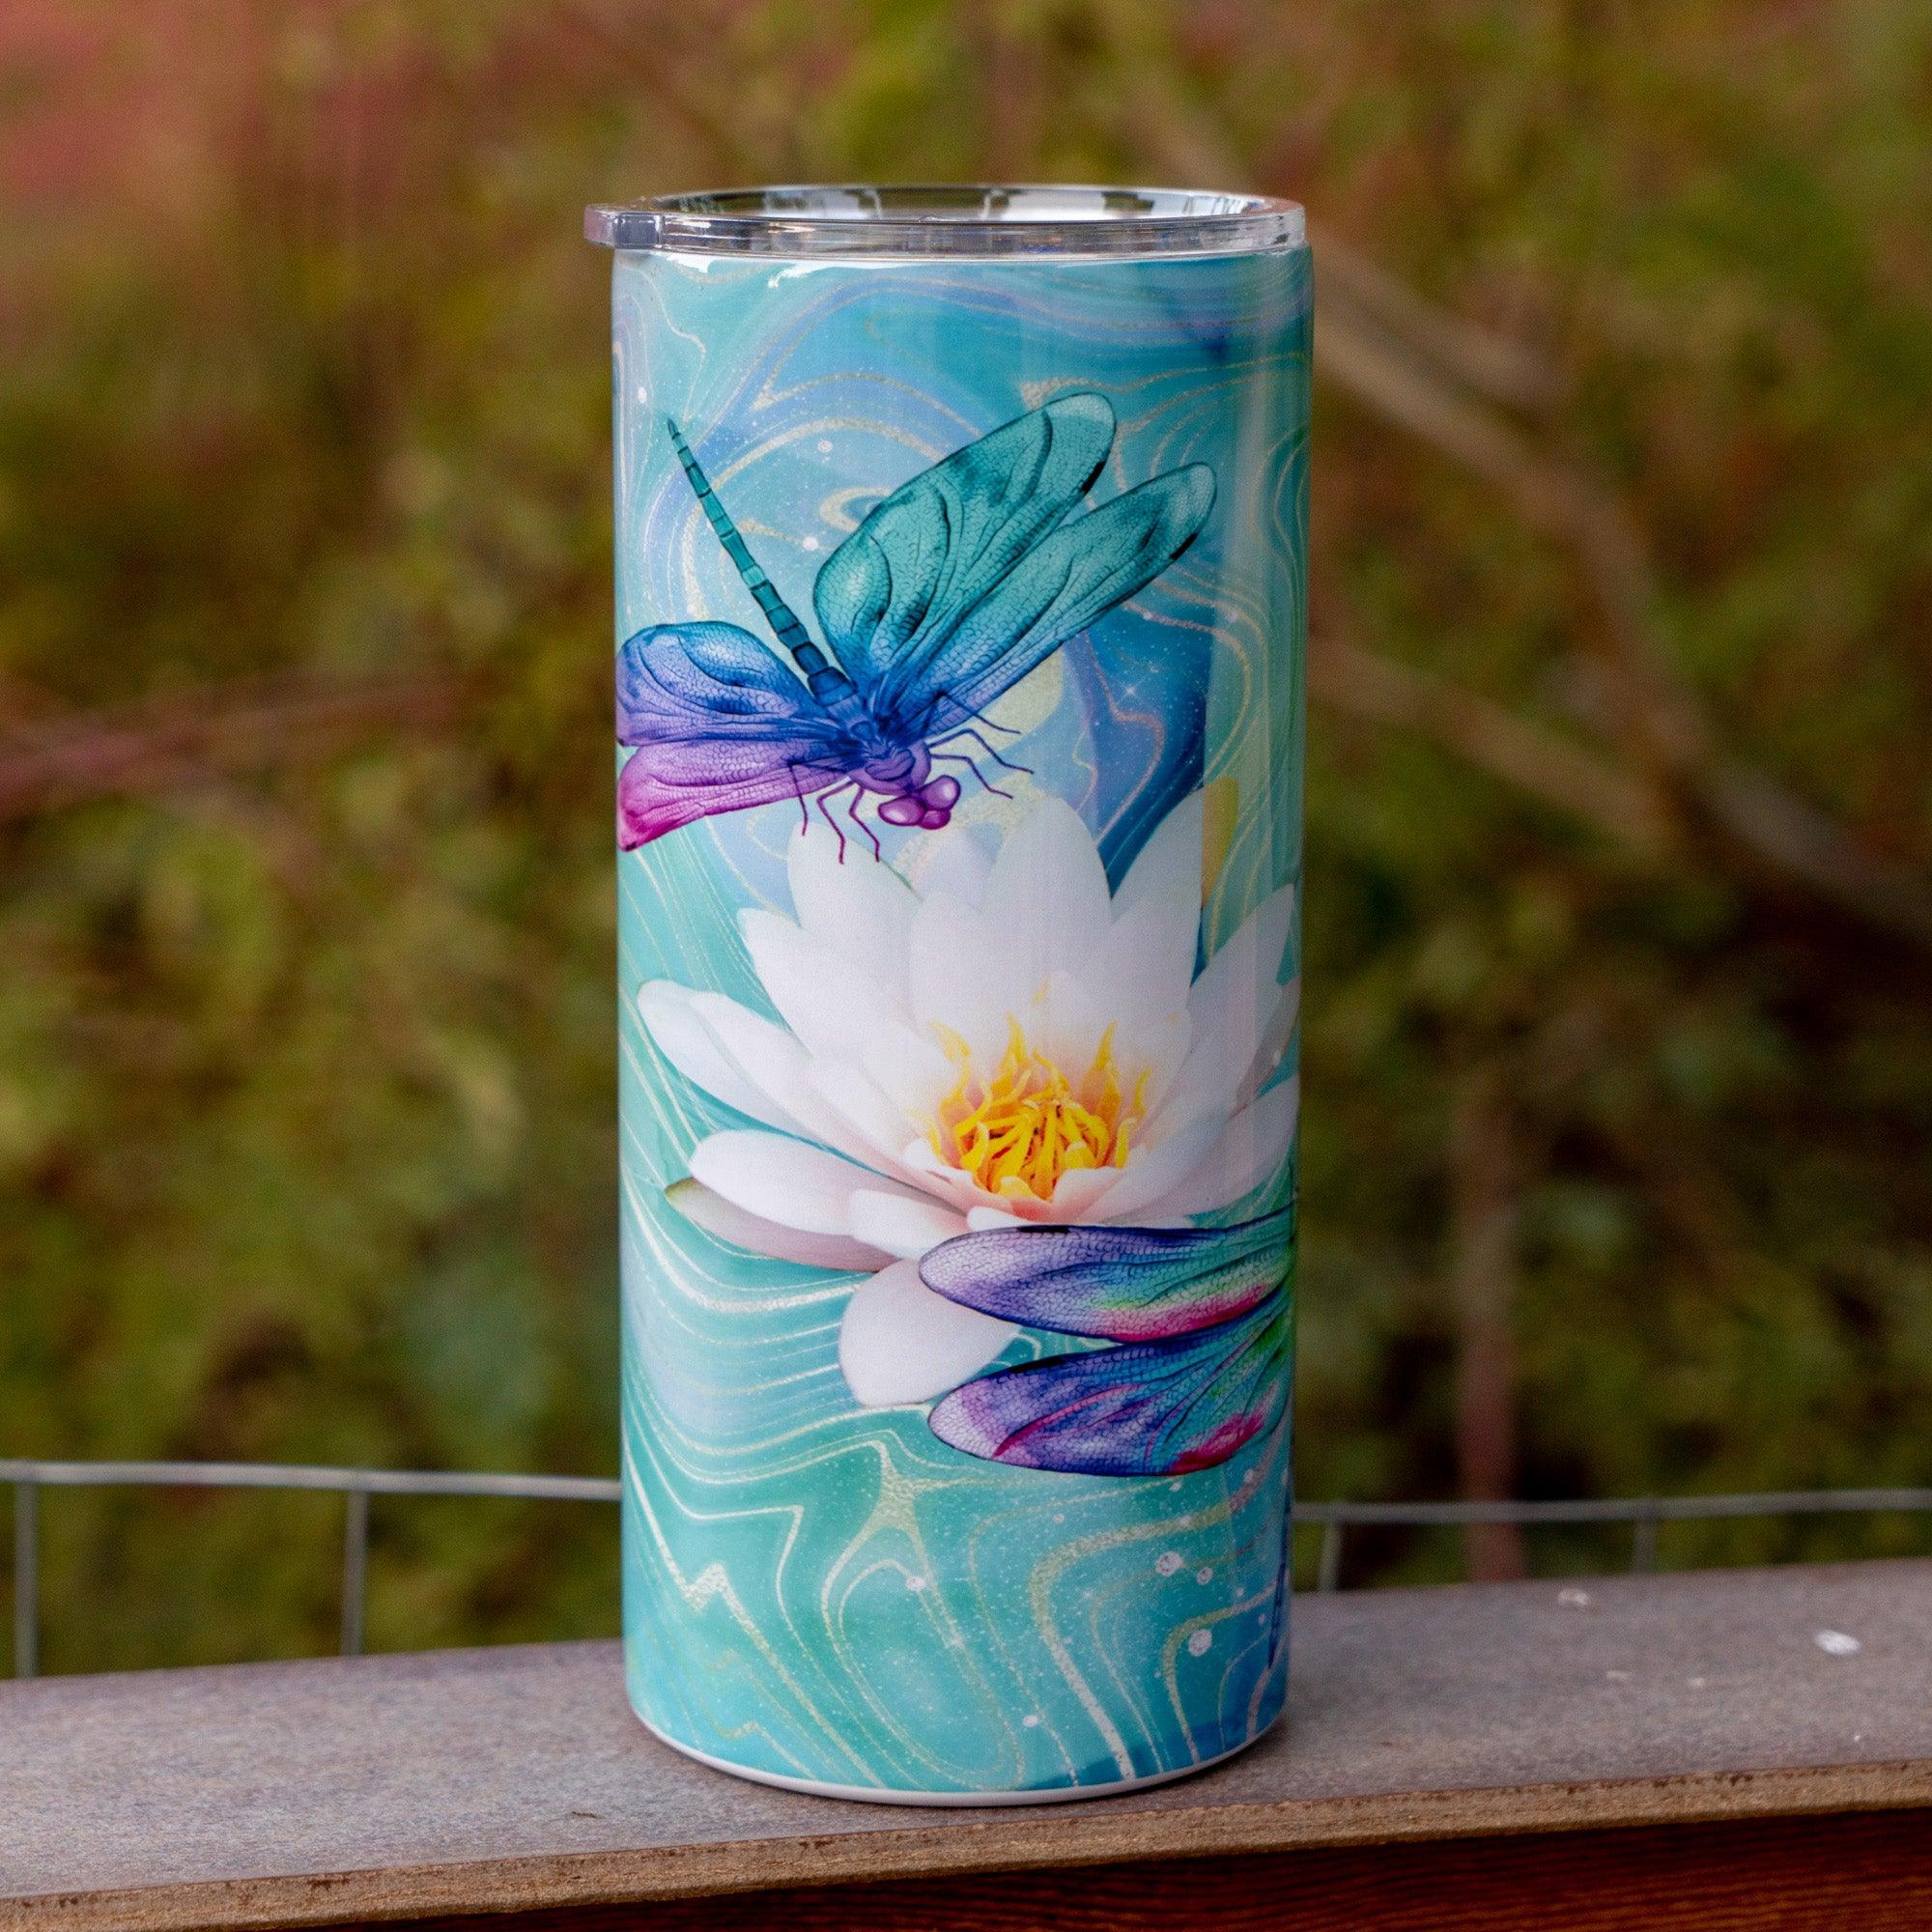 20 oz Sublimation Double Wall Glass Tumbler